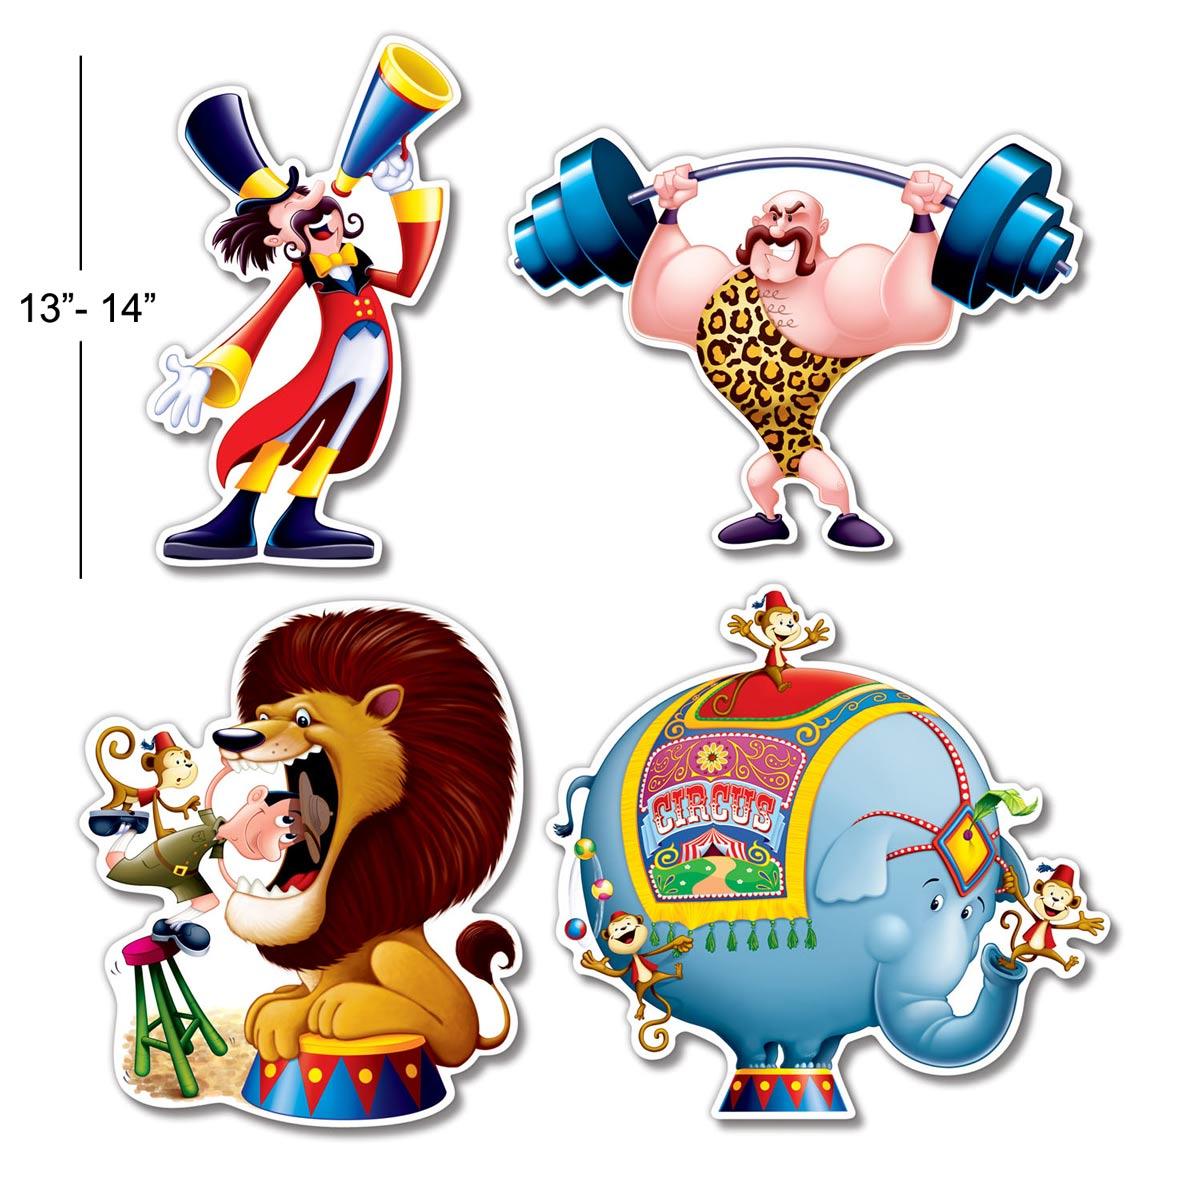 Pack of 4 individual Circus Cutout Decorations by Beistle 54338 available here at Karnival Costumes online party shop